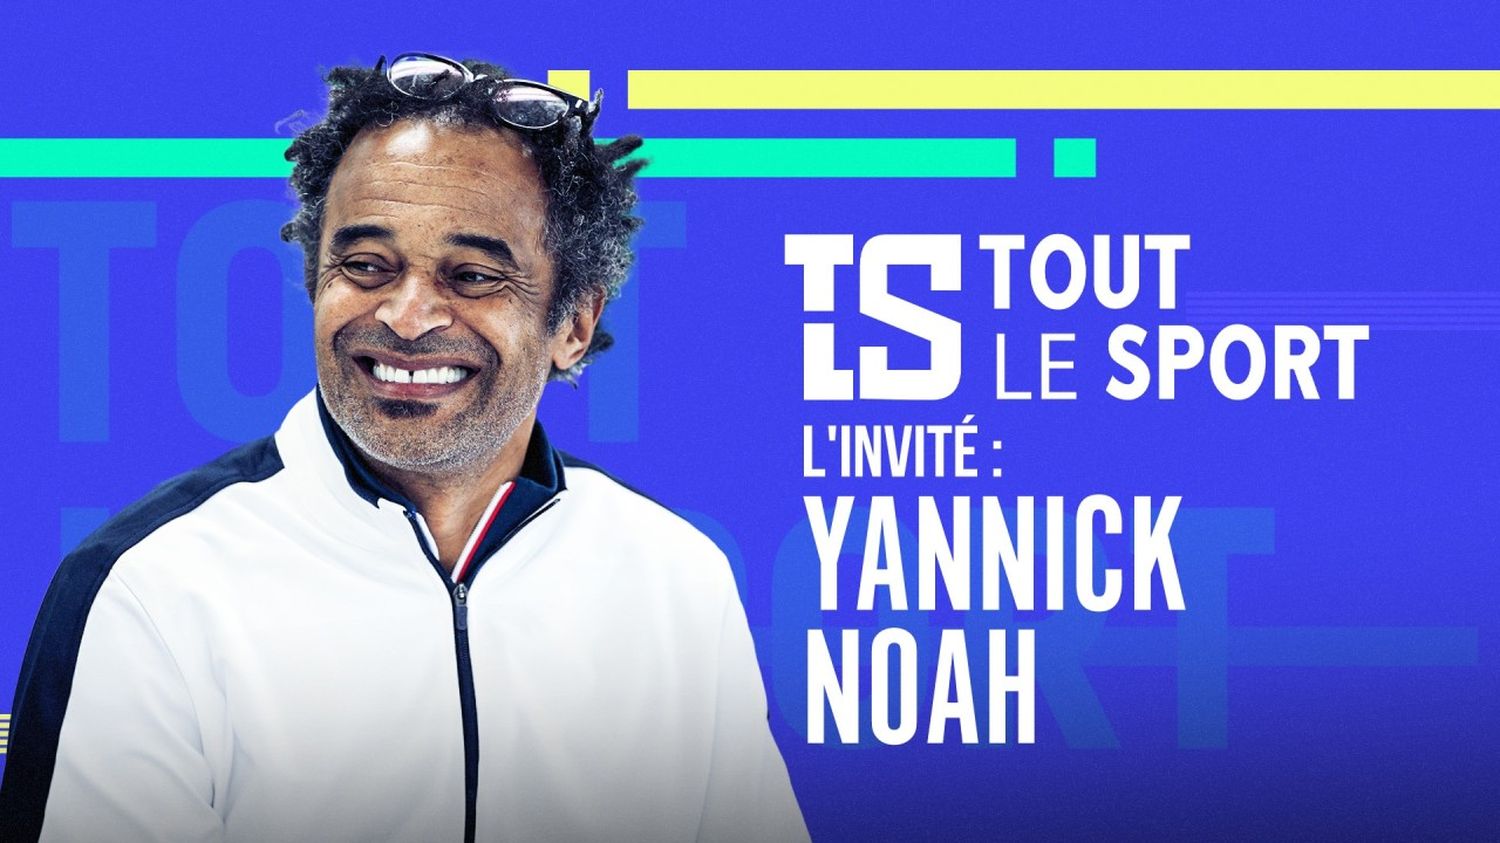 VIDEO.  Paris 2024: "It all started with friendship", Yannick Noah recounts the genesis of his appointment as national tennis coach